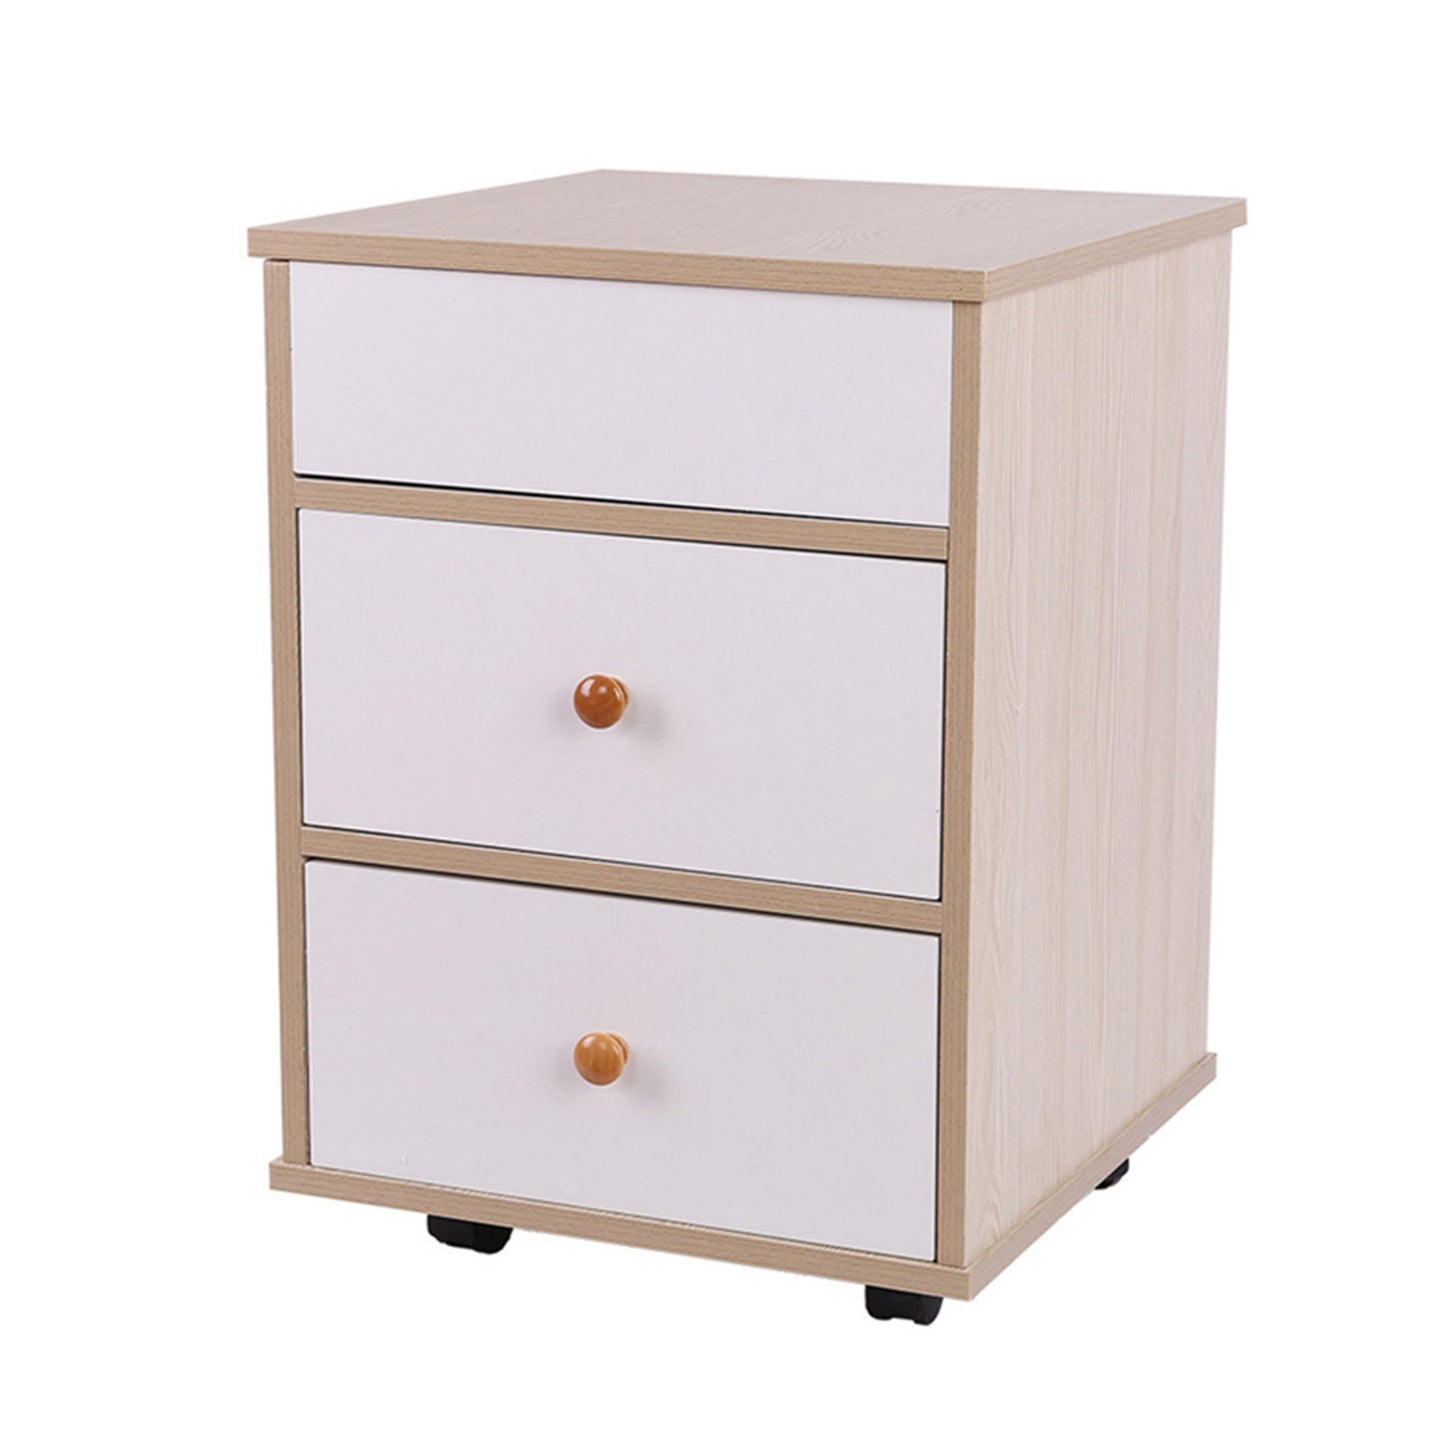 Storage Cabinet Bedroom Bedside Removable Locker Lifting Table Nightstand